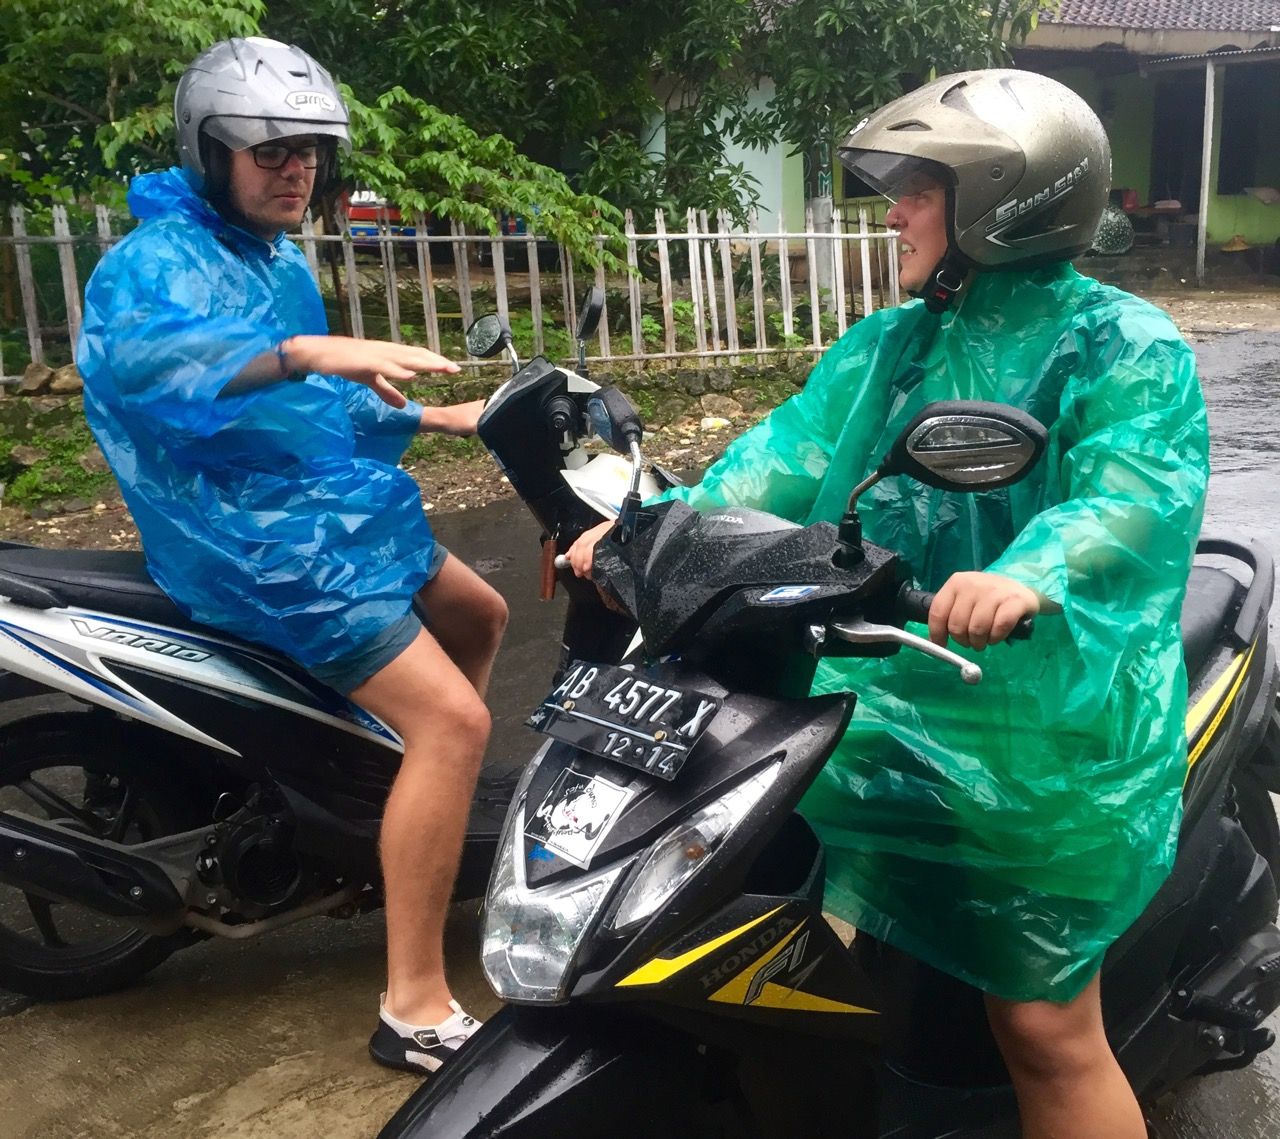 Man and woman with ponchos on motorbikes talking.